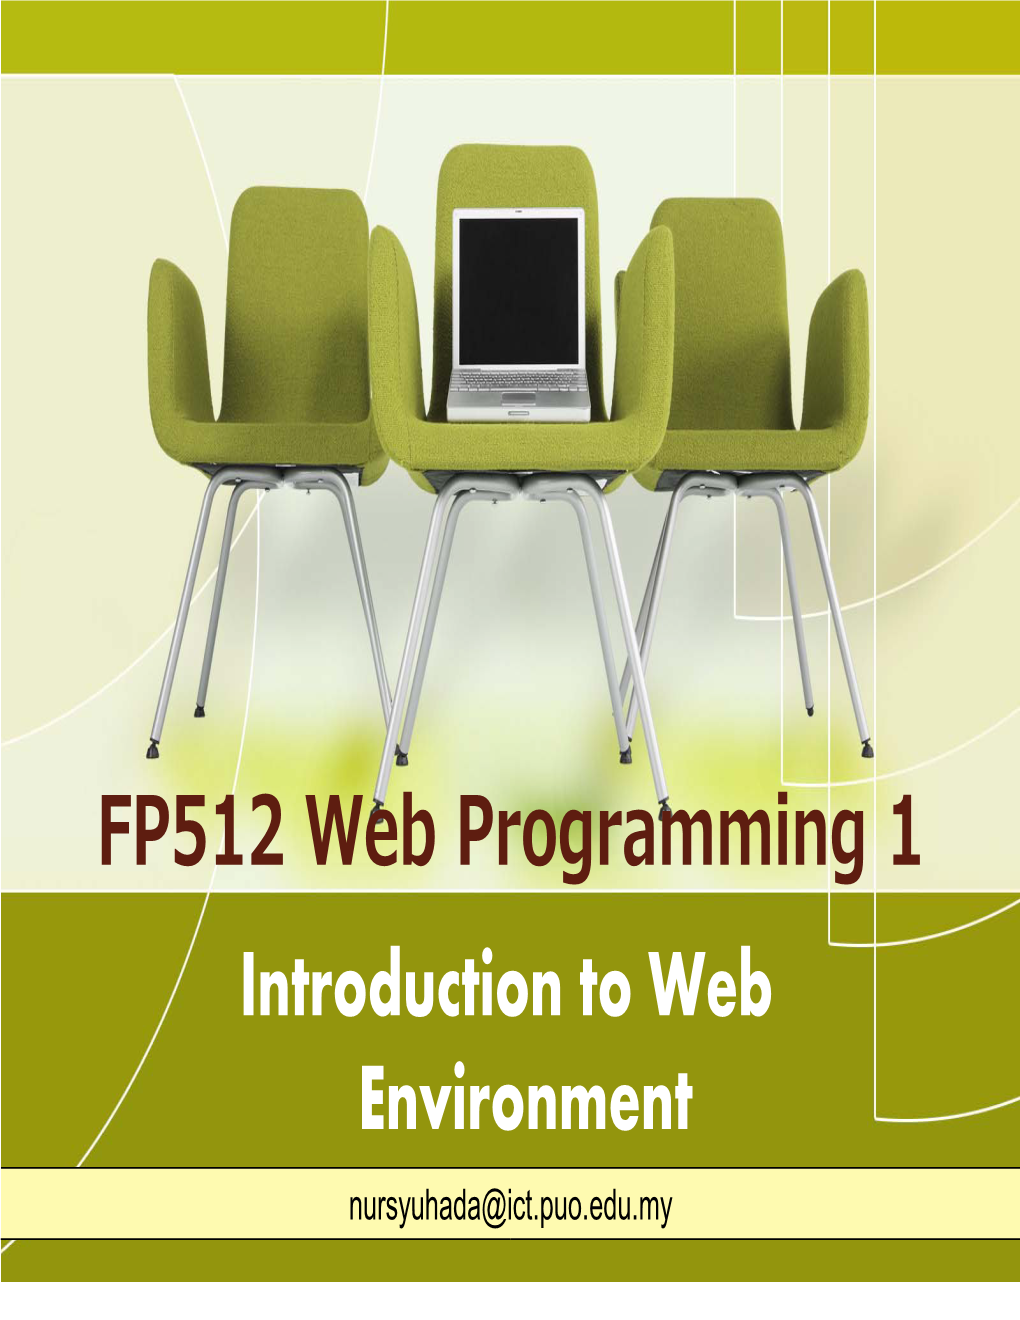 Chapter 1 Introduction to Web Environment